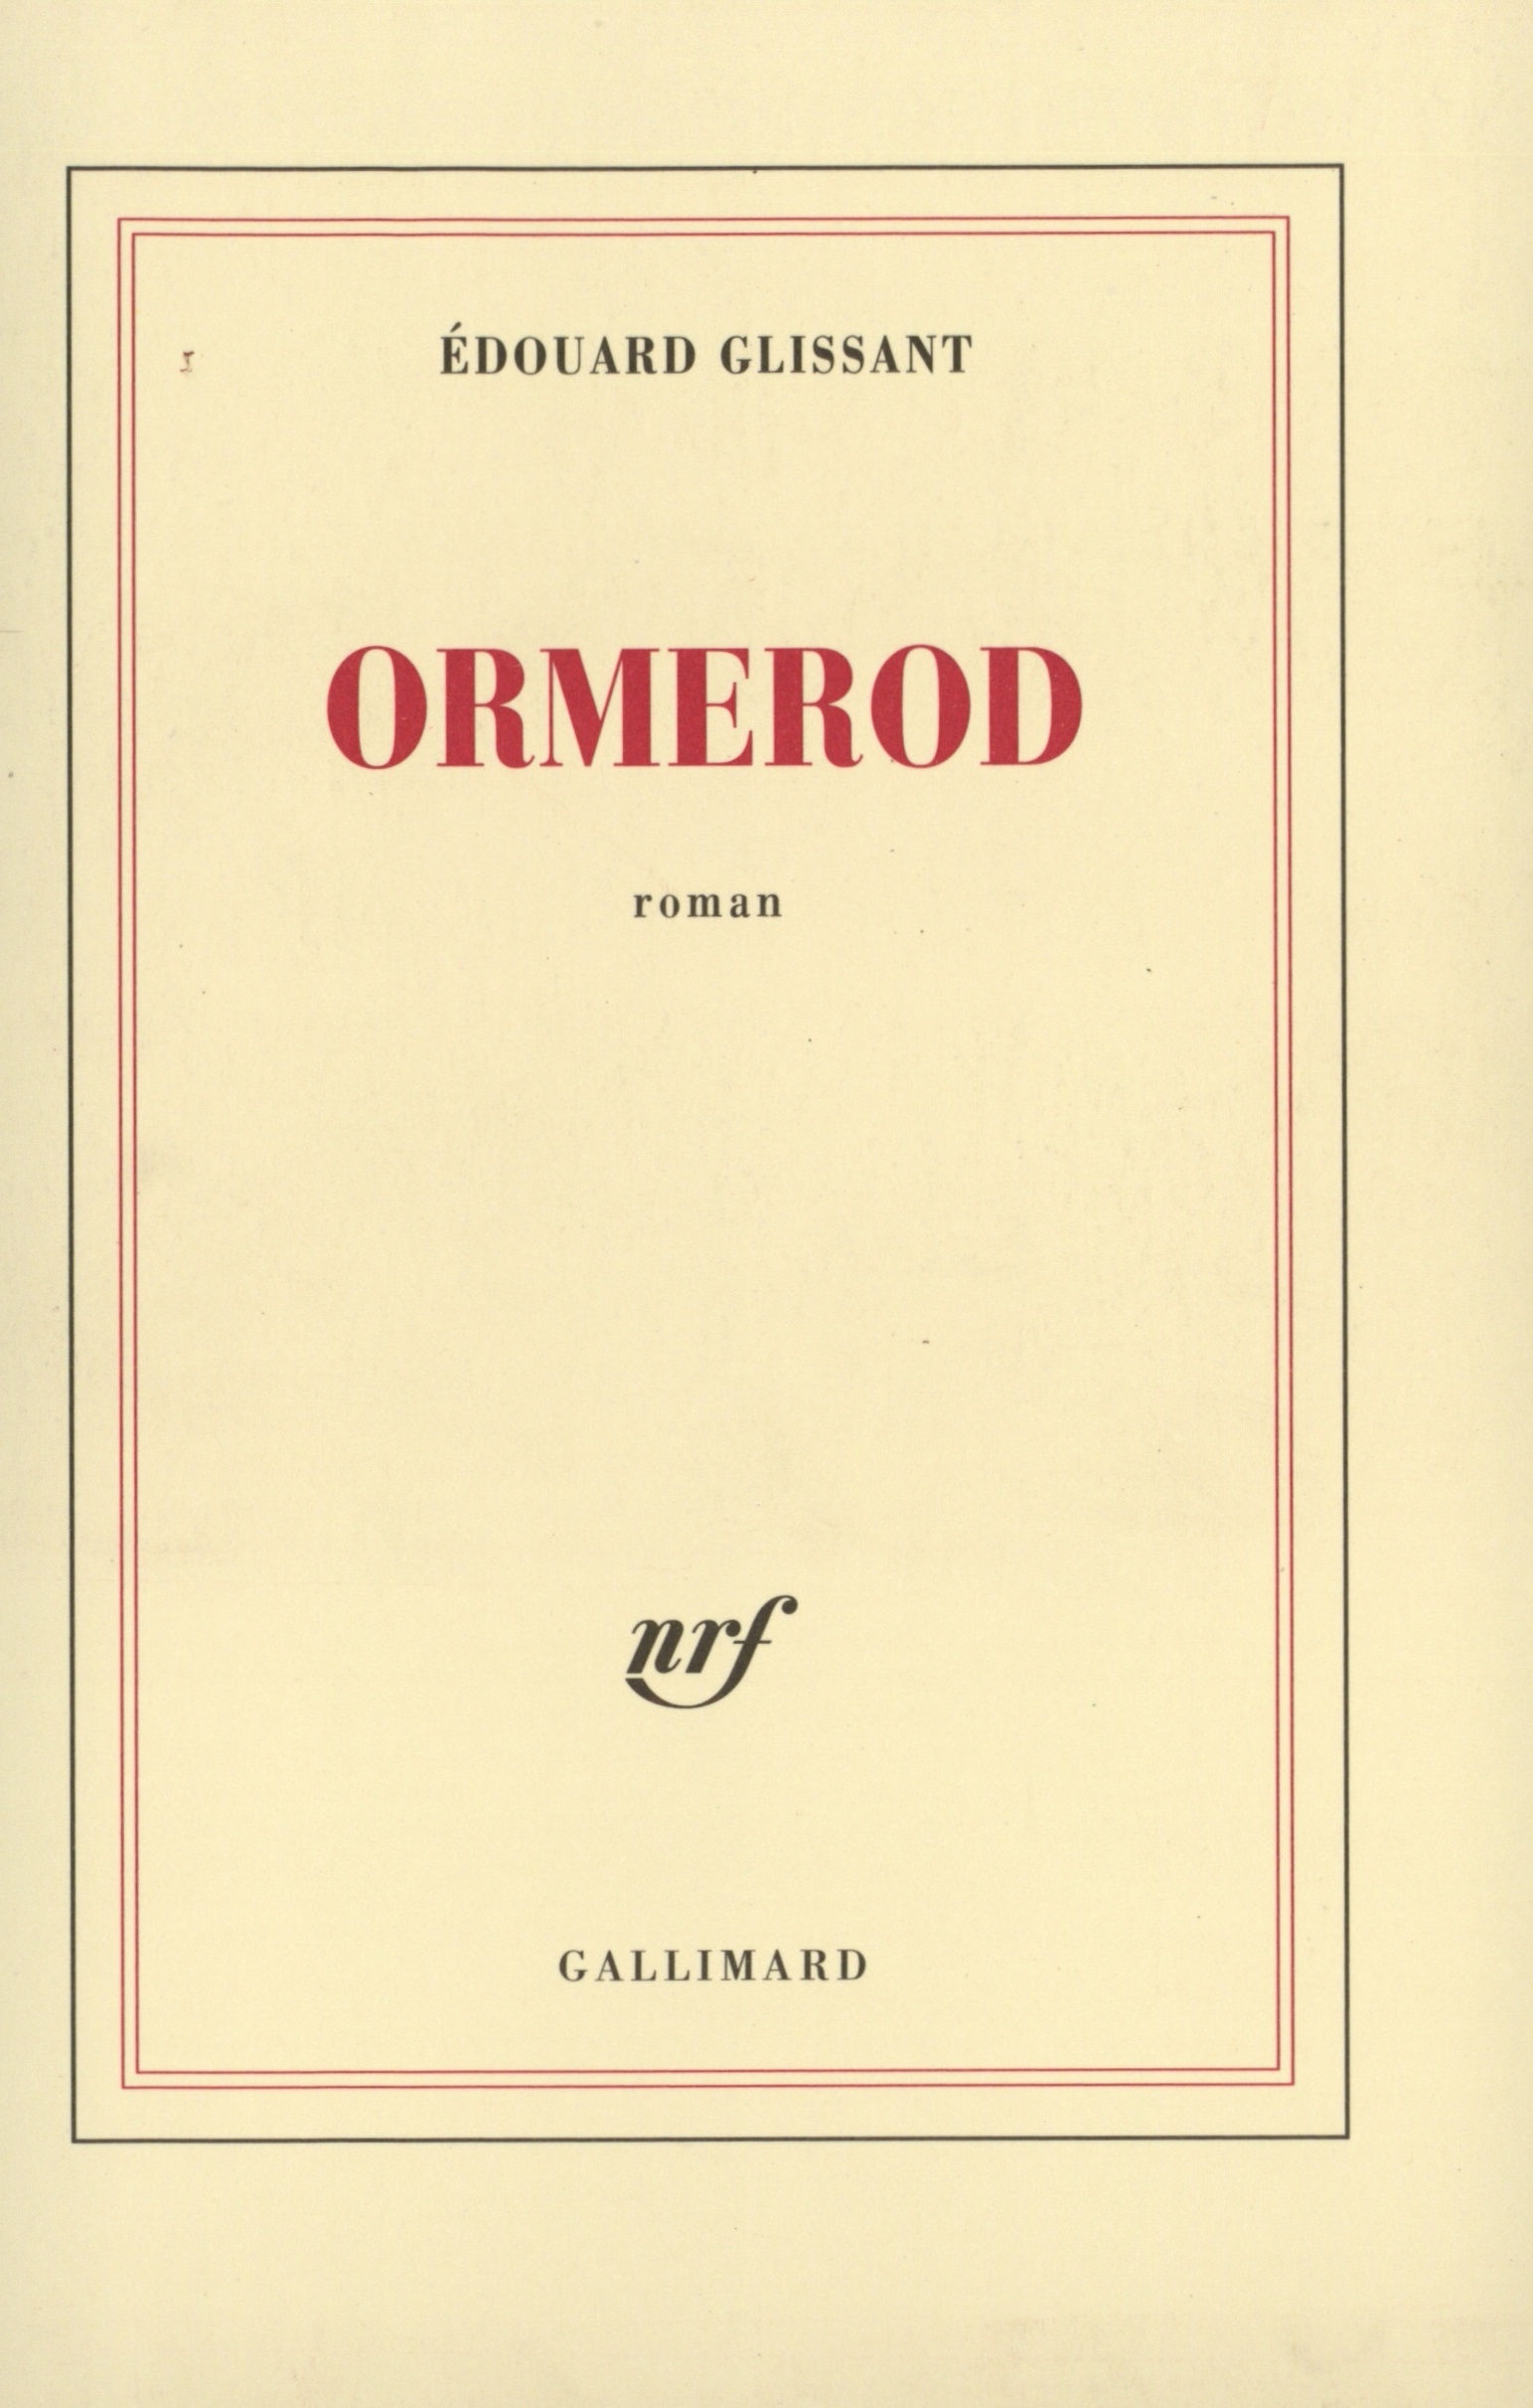 Ormerod (9782070767595-front-cover)